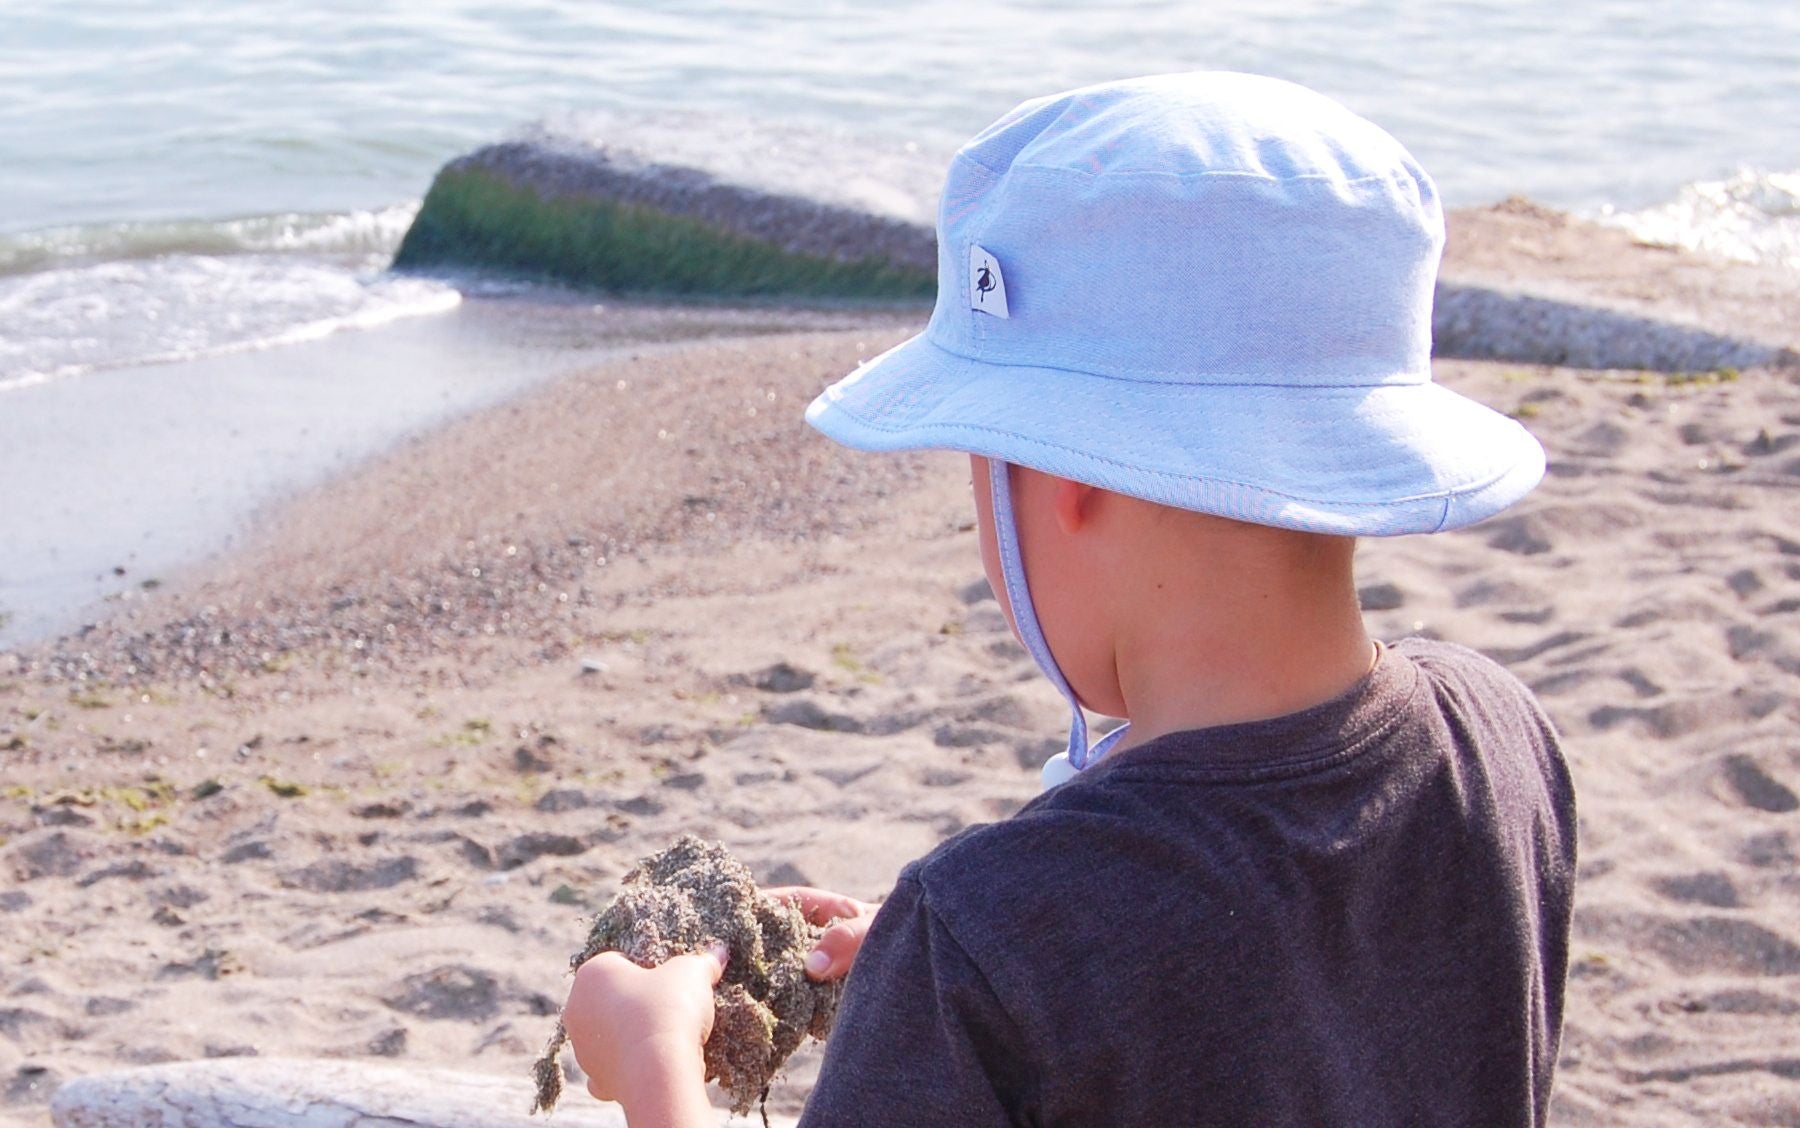 Child and Toddler Sun Protection Hat with Chin Tie, Cord Lock and Safety Break Away Clip-Rated UPF50+ Sun Protection, a must for Outdoor Play. Classic oxford cotton for easy co-ordination. Made in Canada by Puffin Gear